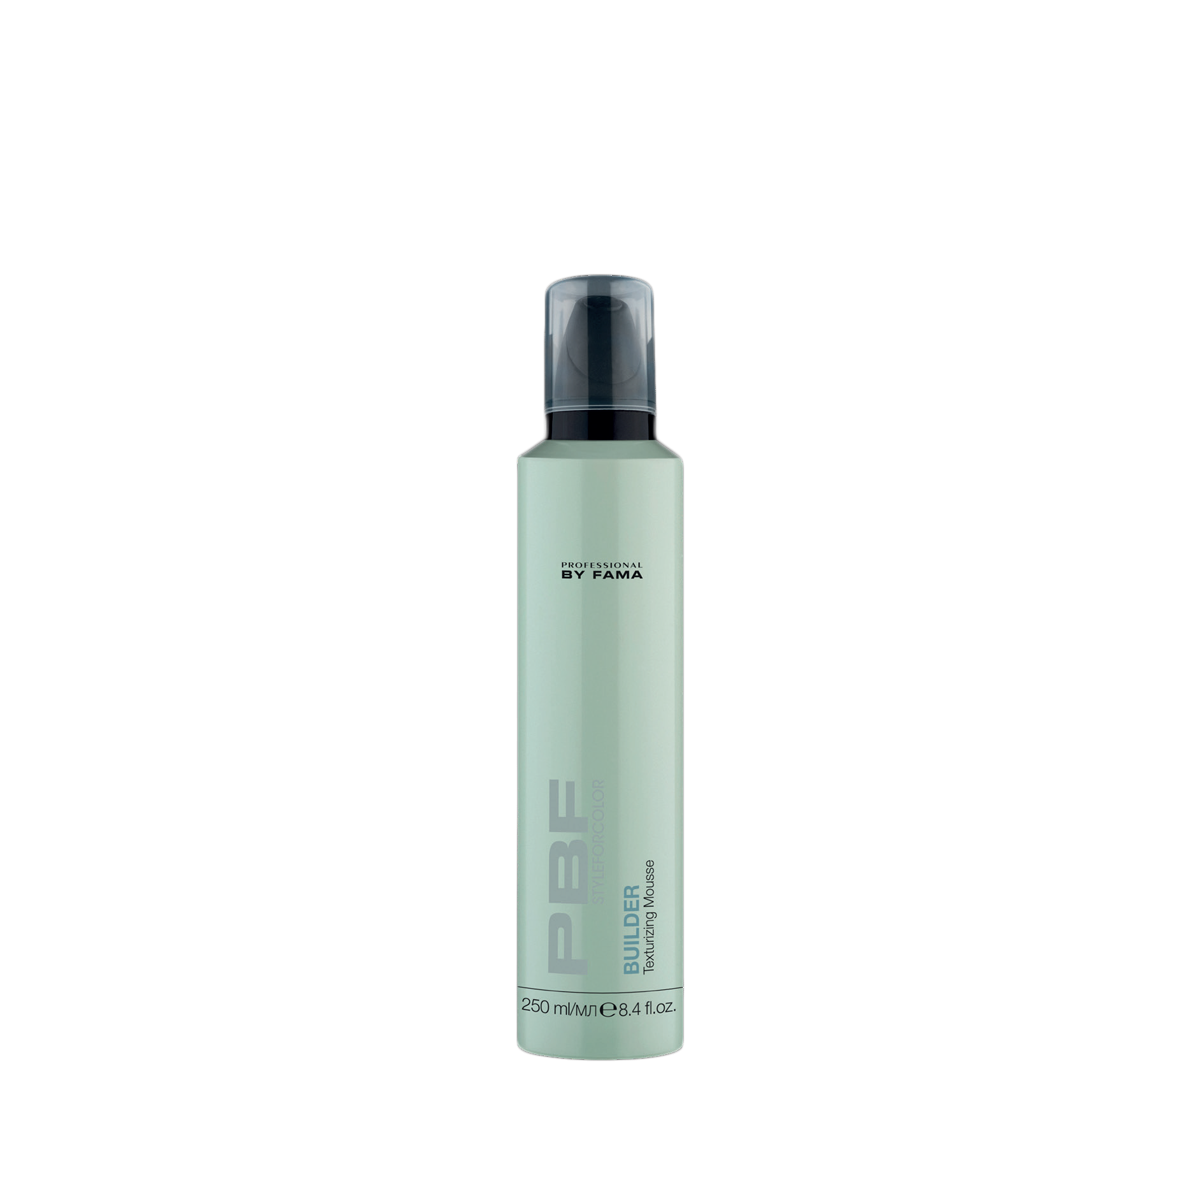 PROFESSIONAL BY FAMA - STYLING - BUILDER (250ml) Mousse strutturante